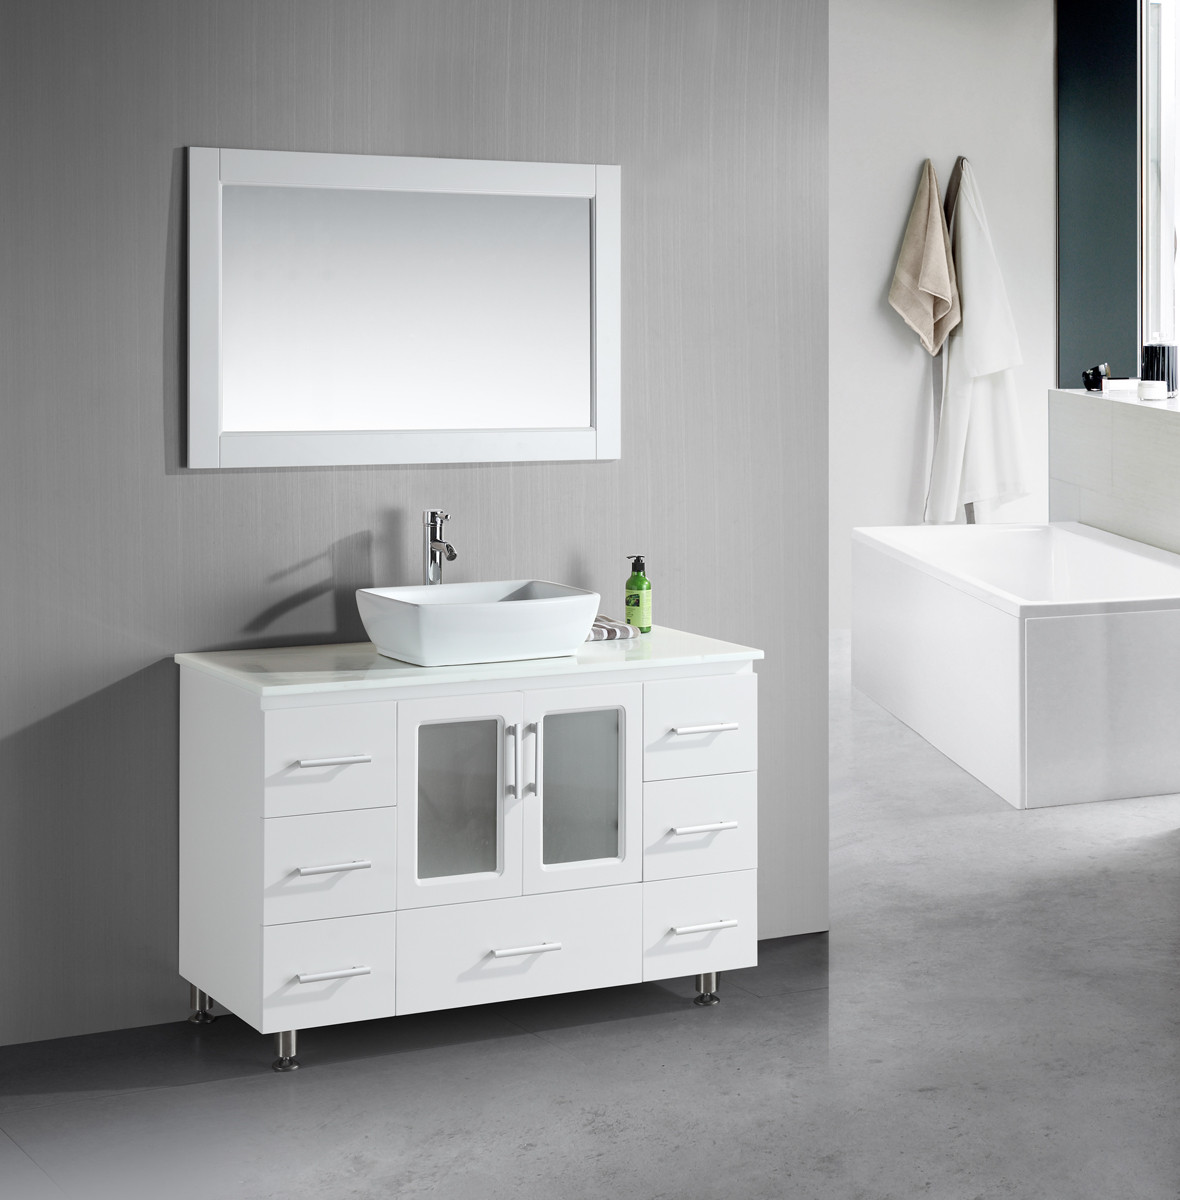 Small Bathroom Cabinet
 Small Bathroom Vanities With Vessel Sinks to Create Cool